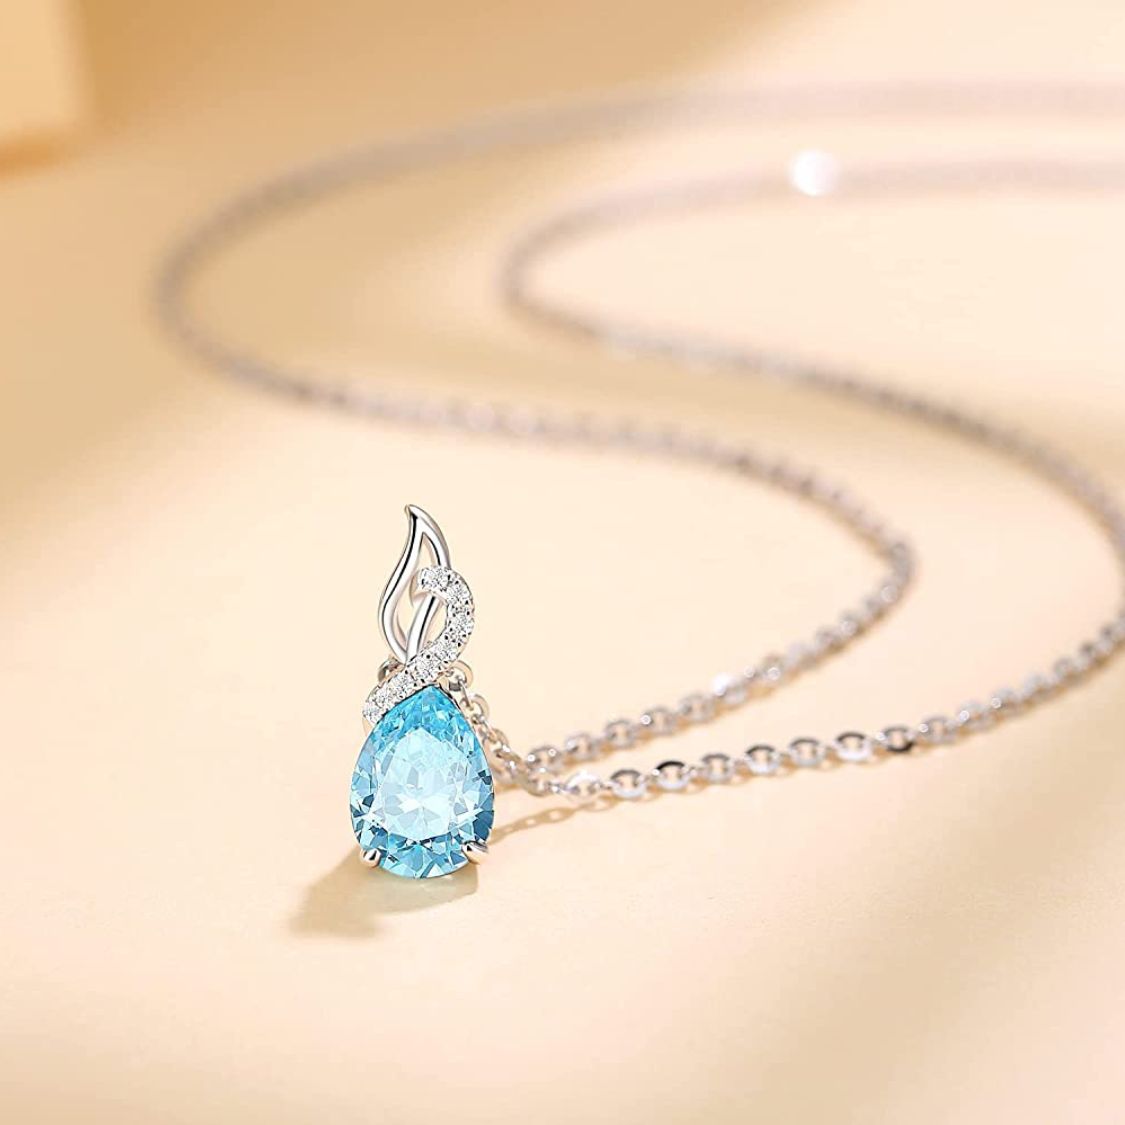 FANCIME "Timeless Heart" Aquamarine March Gemstone Sterling Silver Necklace Detail